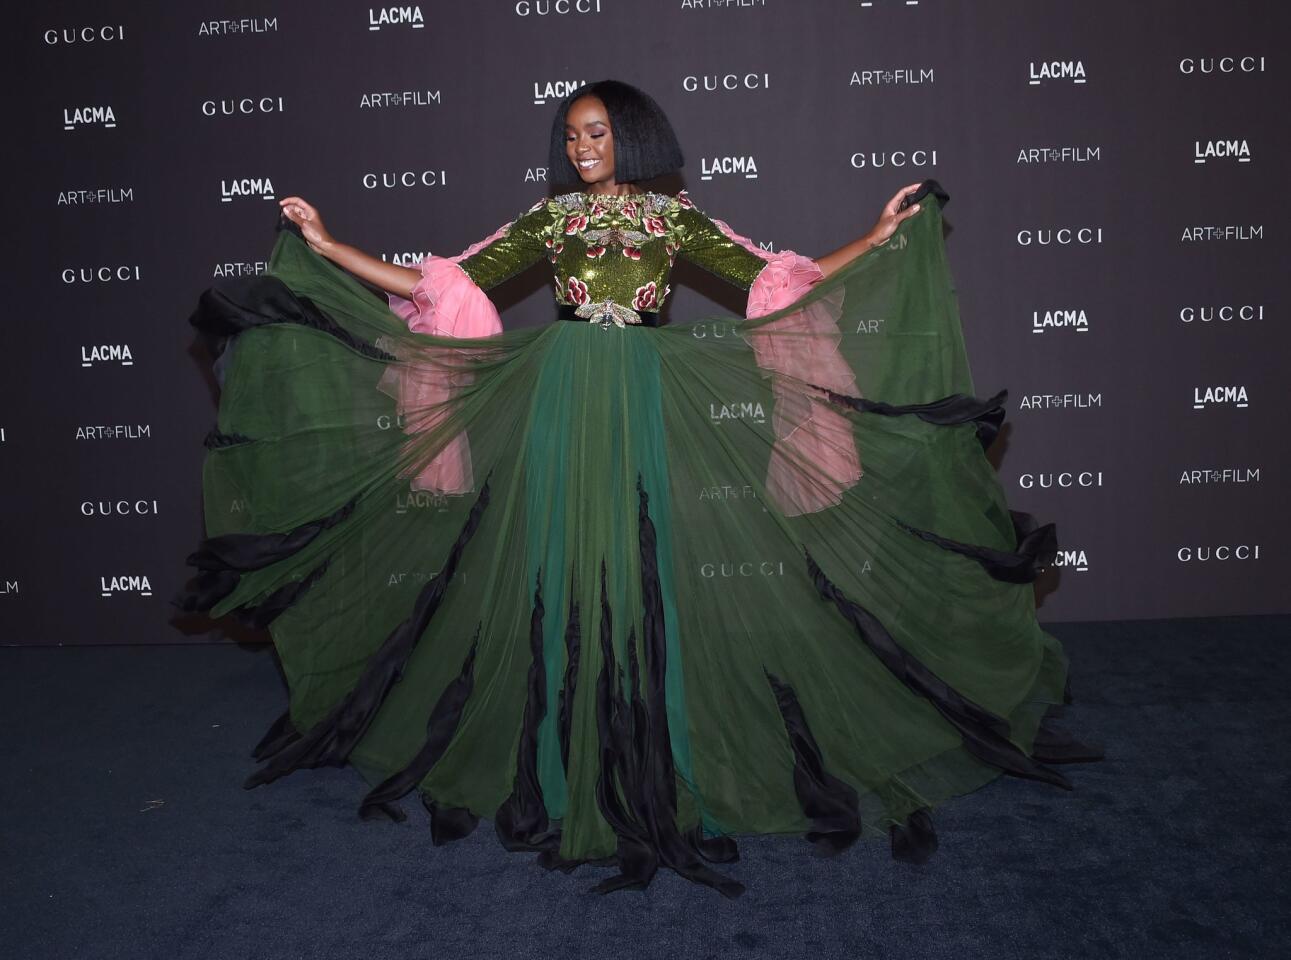 Actress Kiki Layne shows off her gown at the 2018 LACMA Art+Film Gala in Los Angeles.